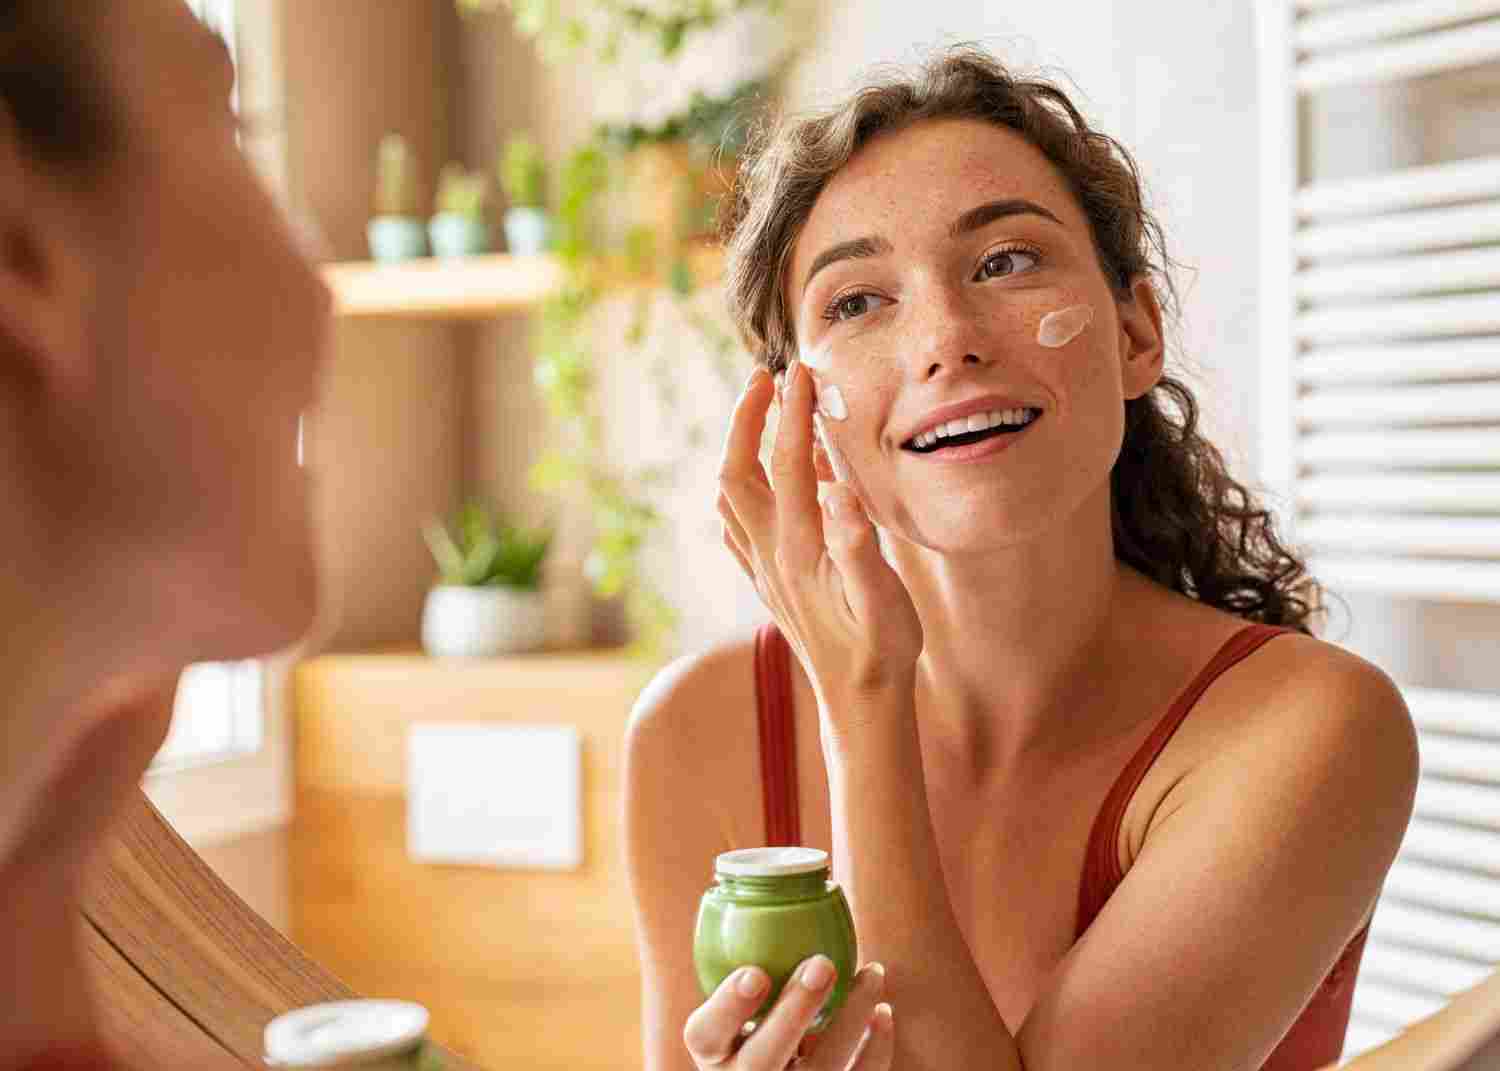 Why You Should Use a Daily Face Moisturizer